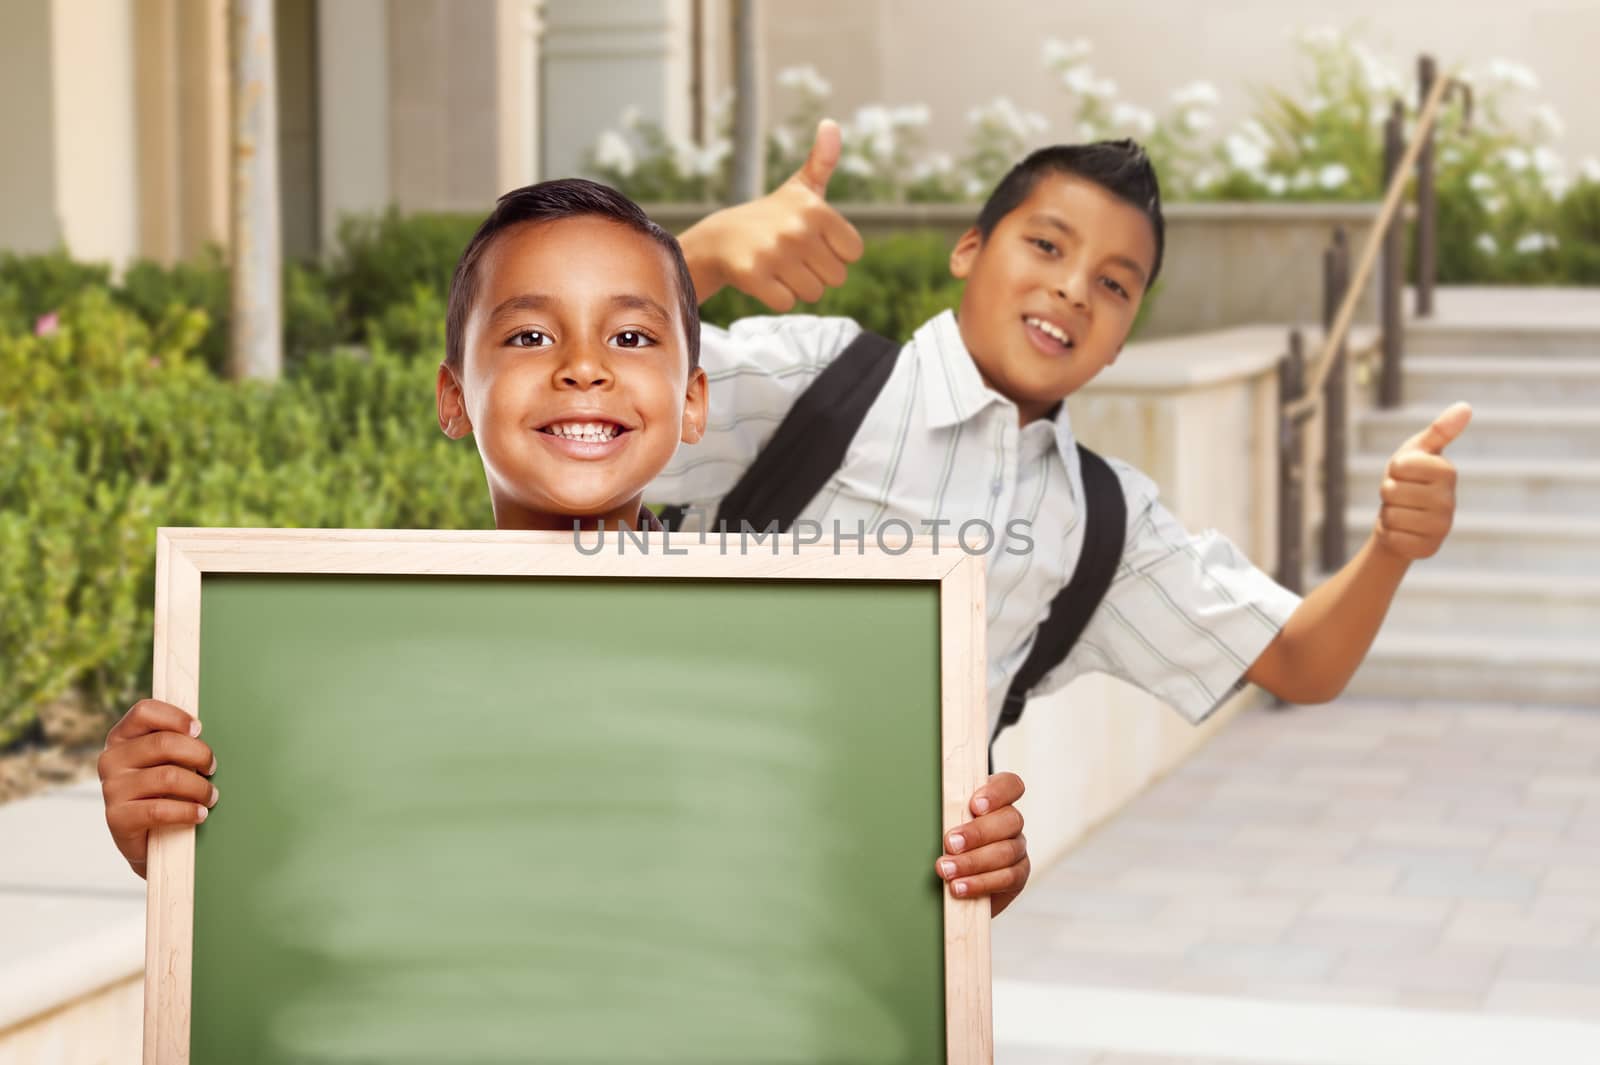 Boys with Thumbs Up Holding Blank Chalk Board on Campus by Feverpitched